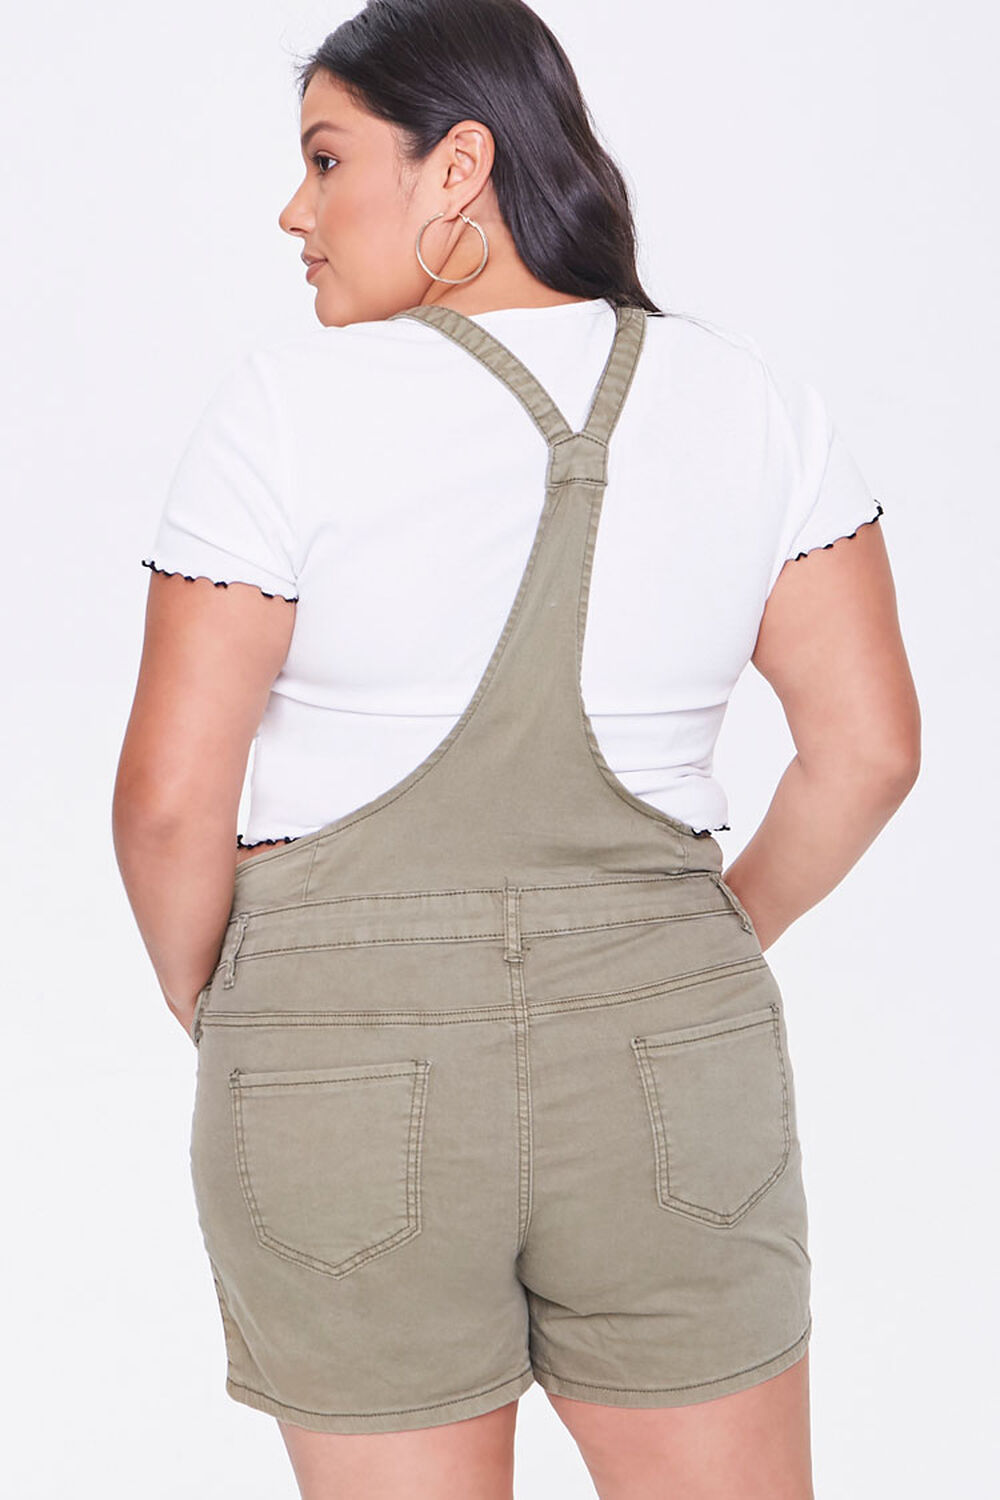 OLIVE Plus Size Distressed Overall Shorts, image 3